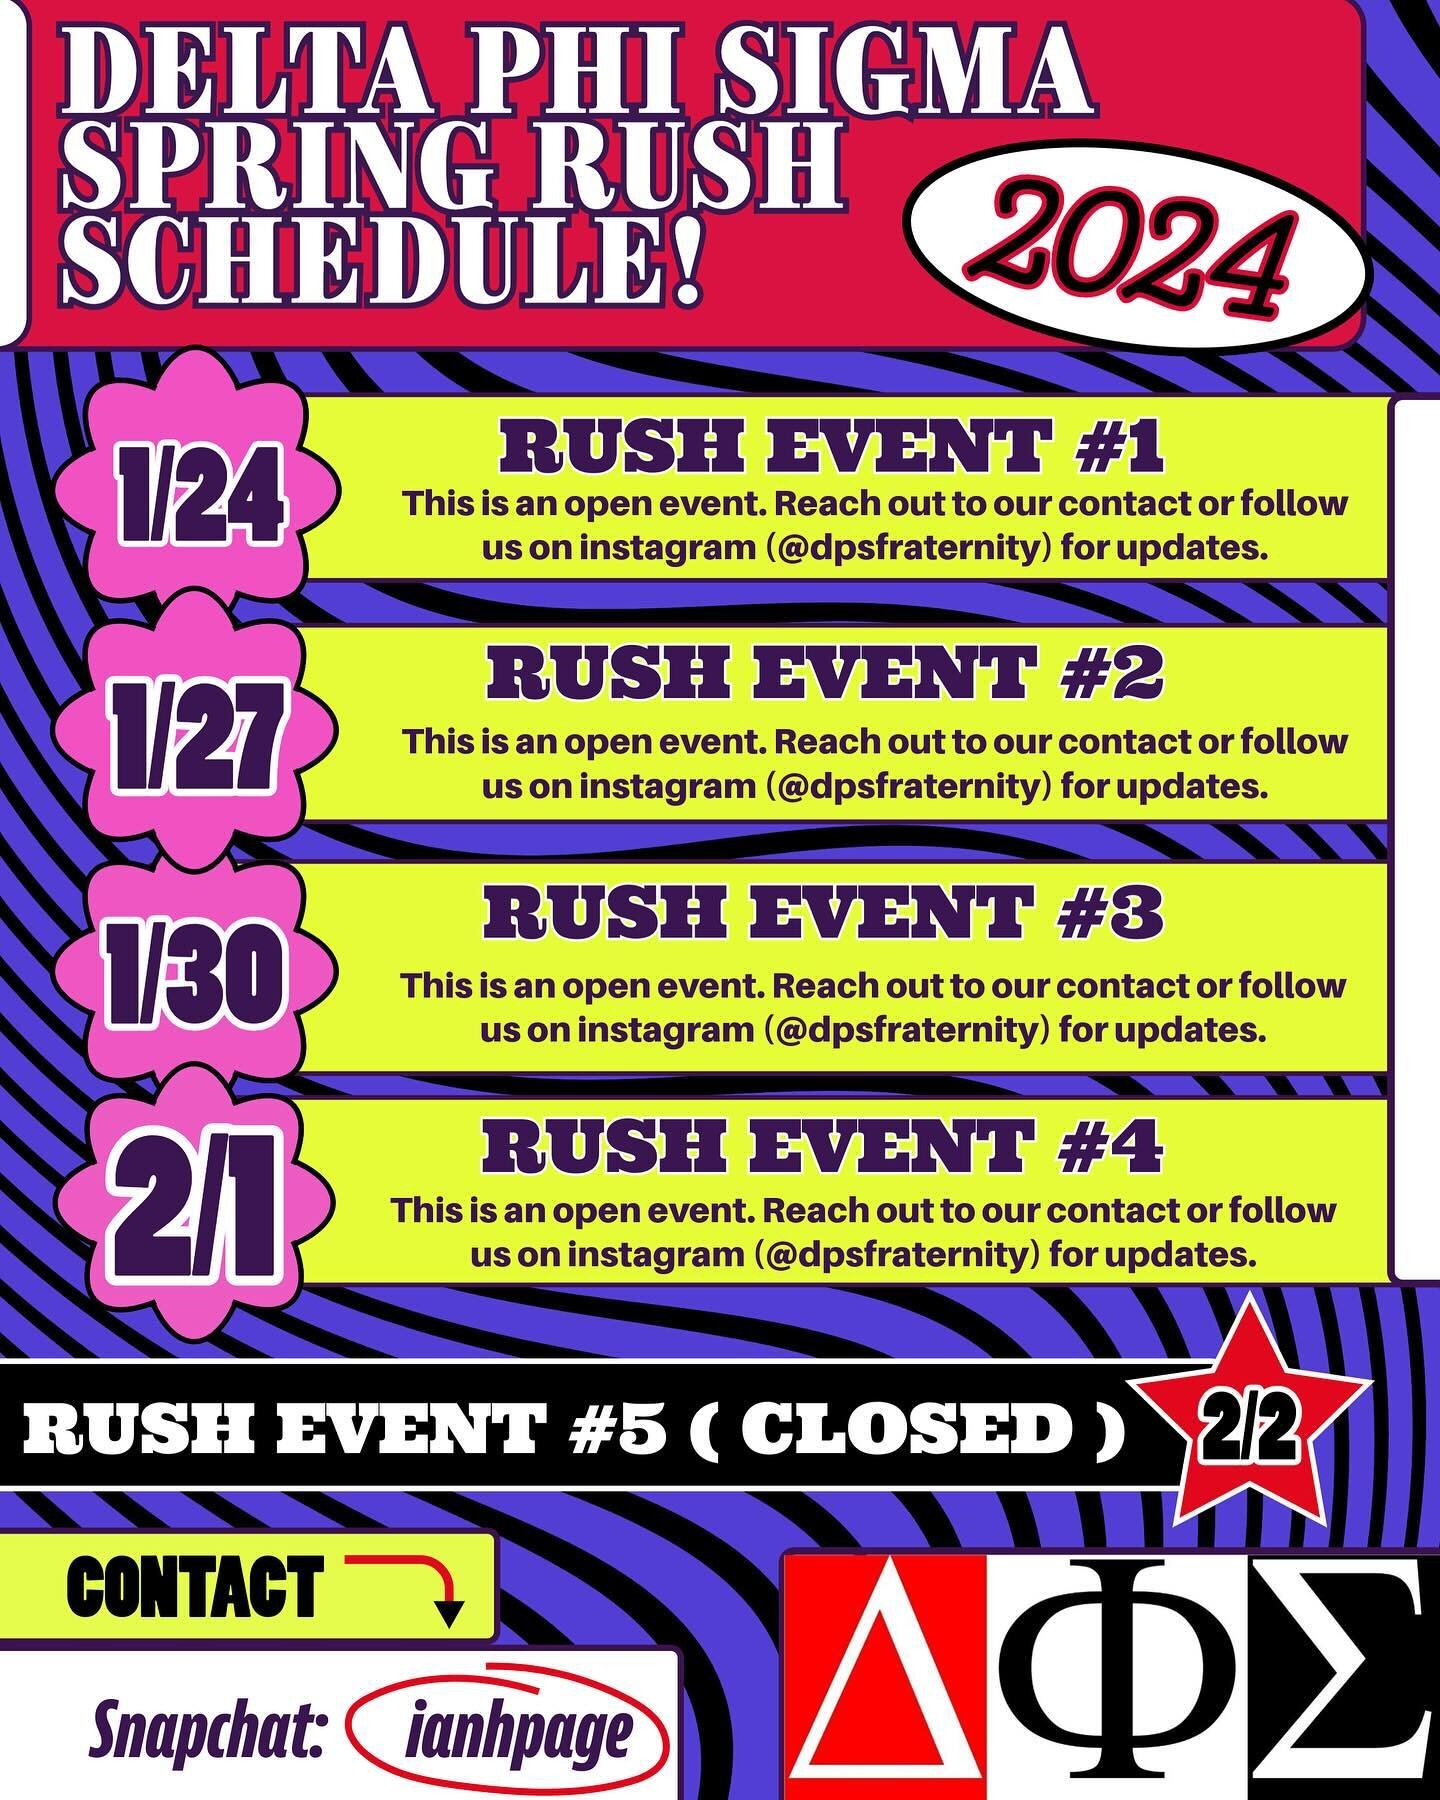 Delta Phi Sigma official 2024 Spring Rush Schedule is here! If you are interested in meeting DPS brothers and learning more about how you could rush then please reach out to our contact (Snapchat: ianhpage) asap. Make sure to follow us on instagram f